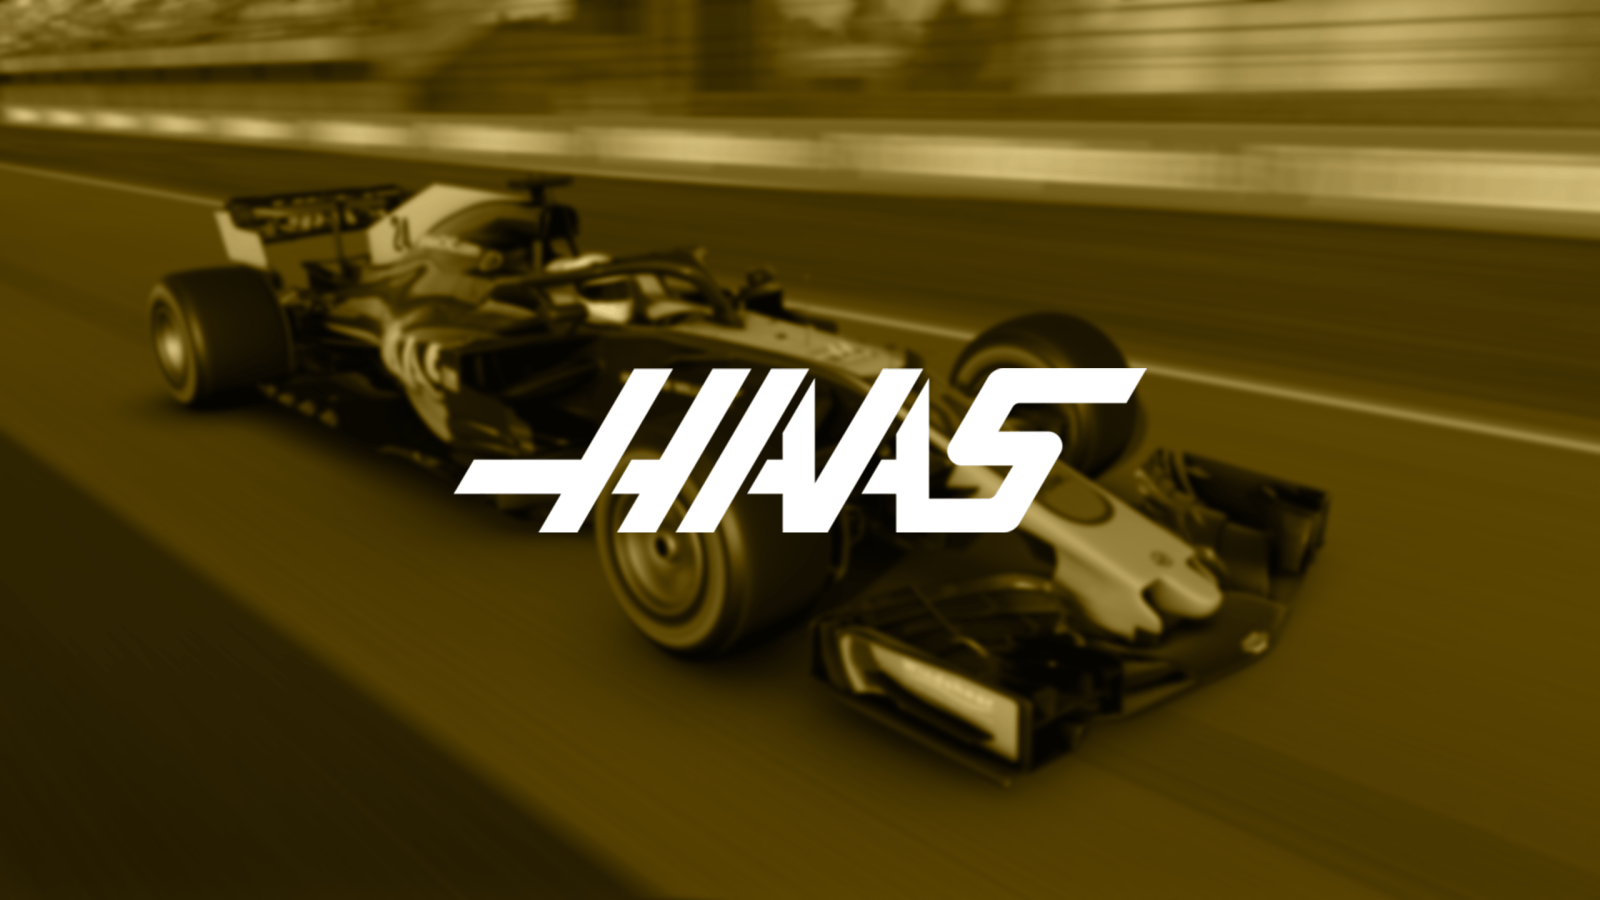 Haas F1 Background 9